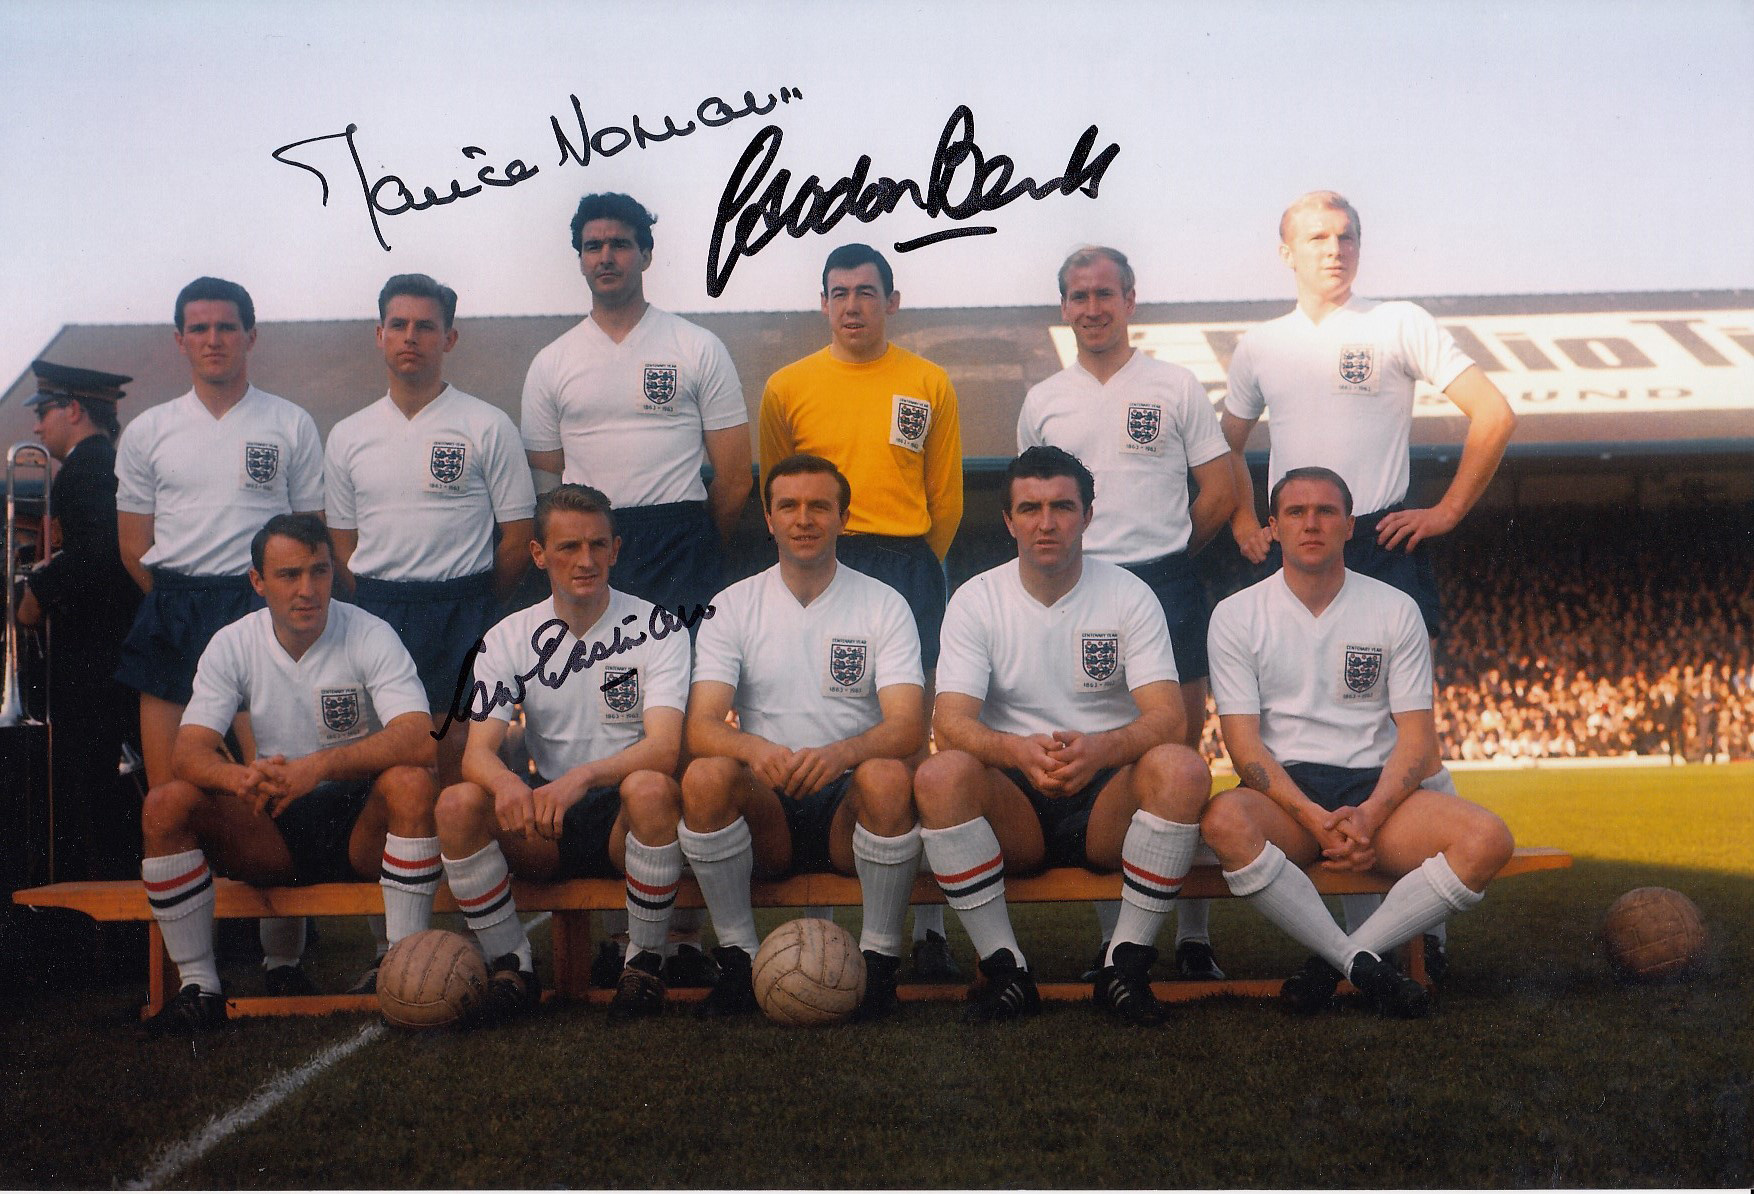 Football Autographed England 1963 12 X 8 Photo : Col, Depicting A Wonderful Image Showing Players